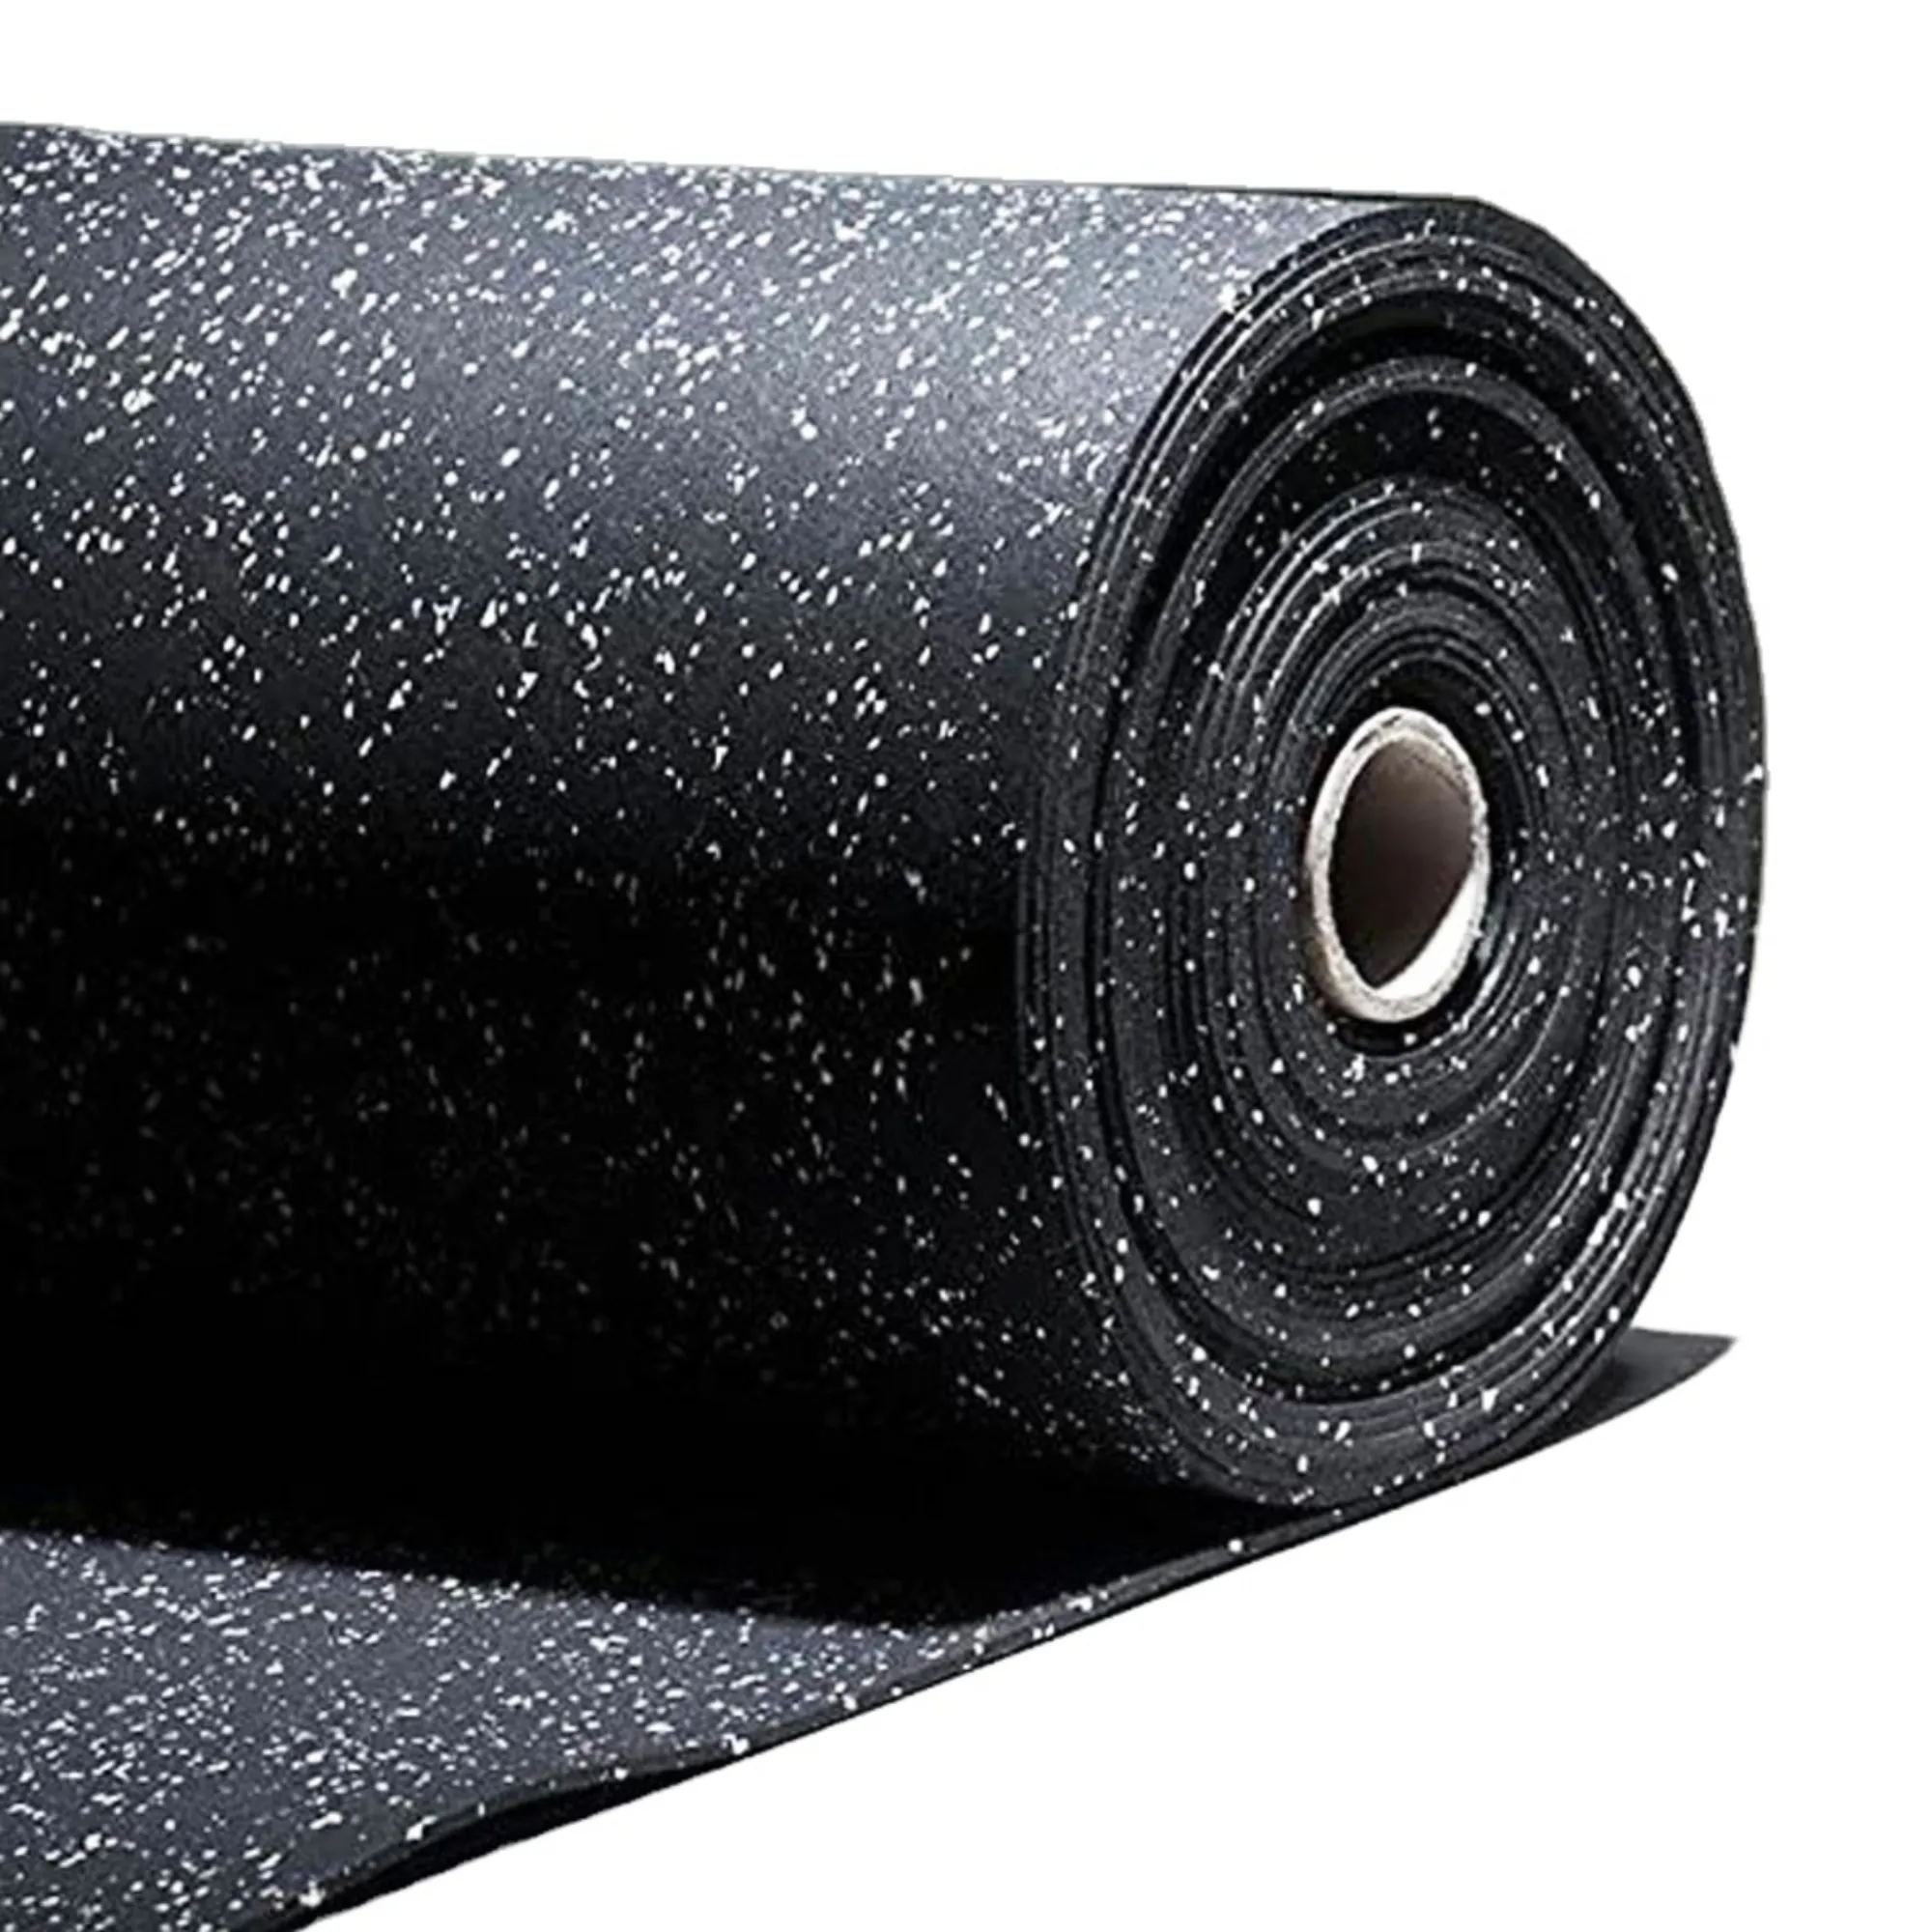 Epdm Rubber Flooring Roll at Rs 70/sq ft